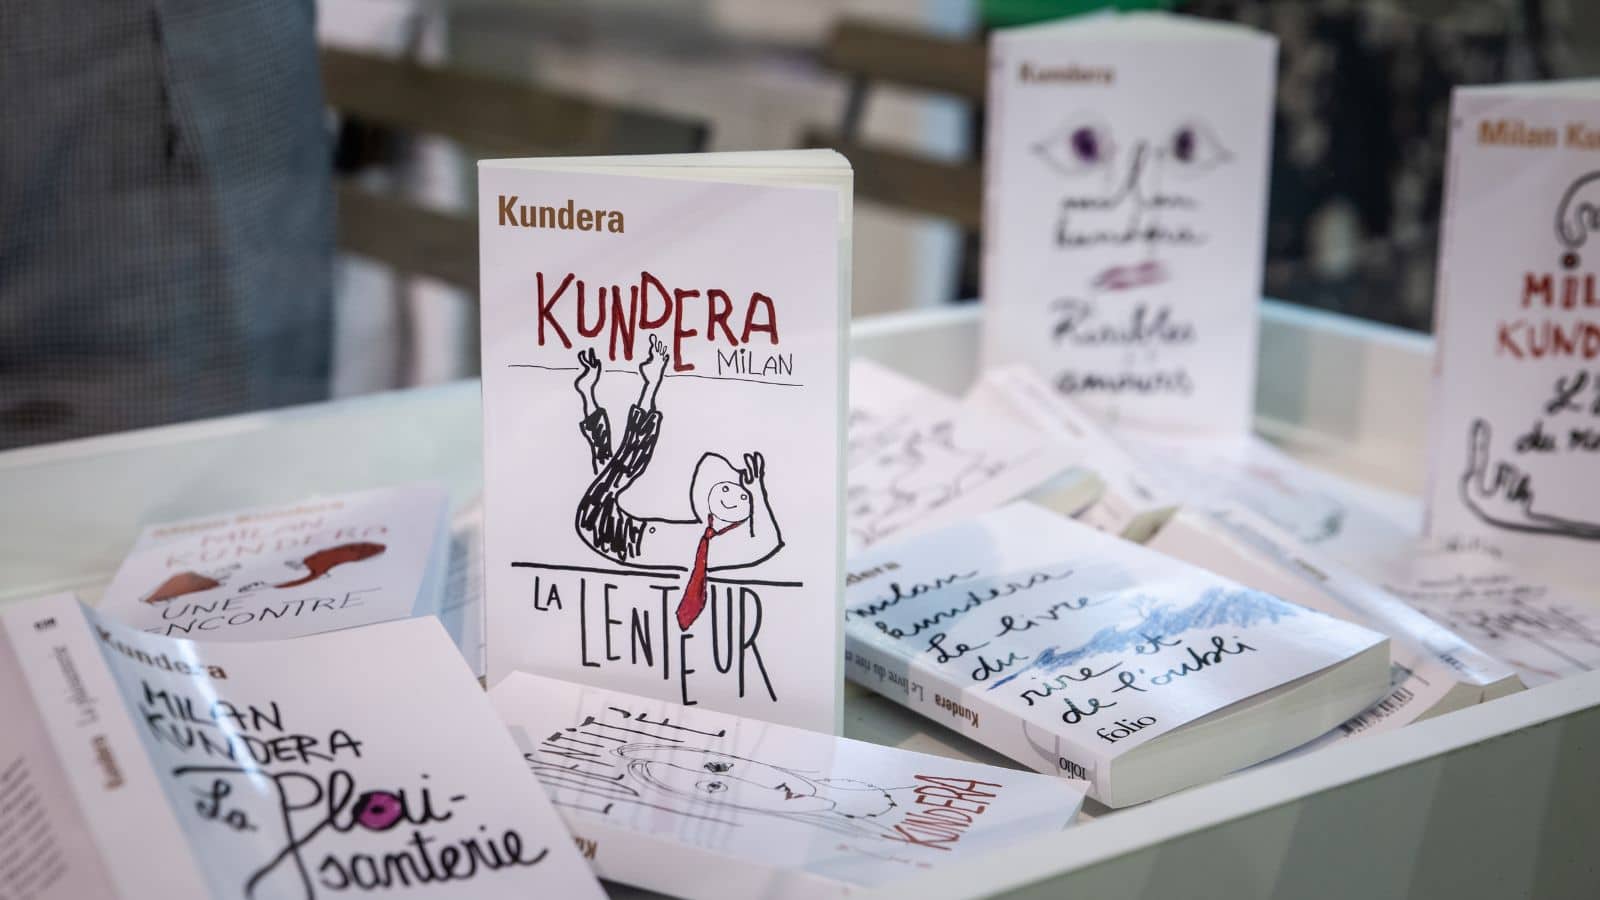 <p>Dive into Kundera’s writing on existentialism, politics, and love in the context of communist Czechoslovakia. The weight of personal decisions in an uncertain environment is shown in “The Unbearable Lightness of Being” through the connected lives of four protagonists.</p>